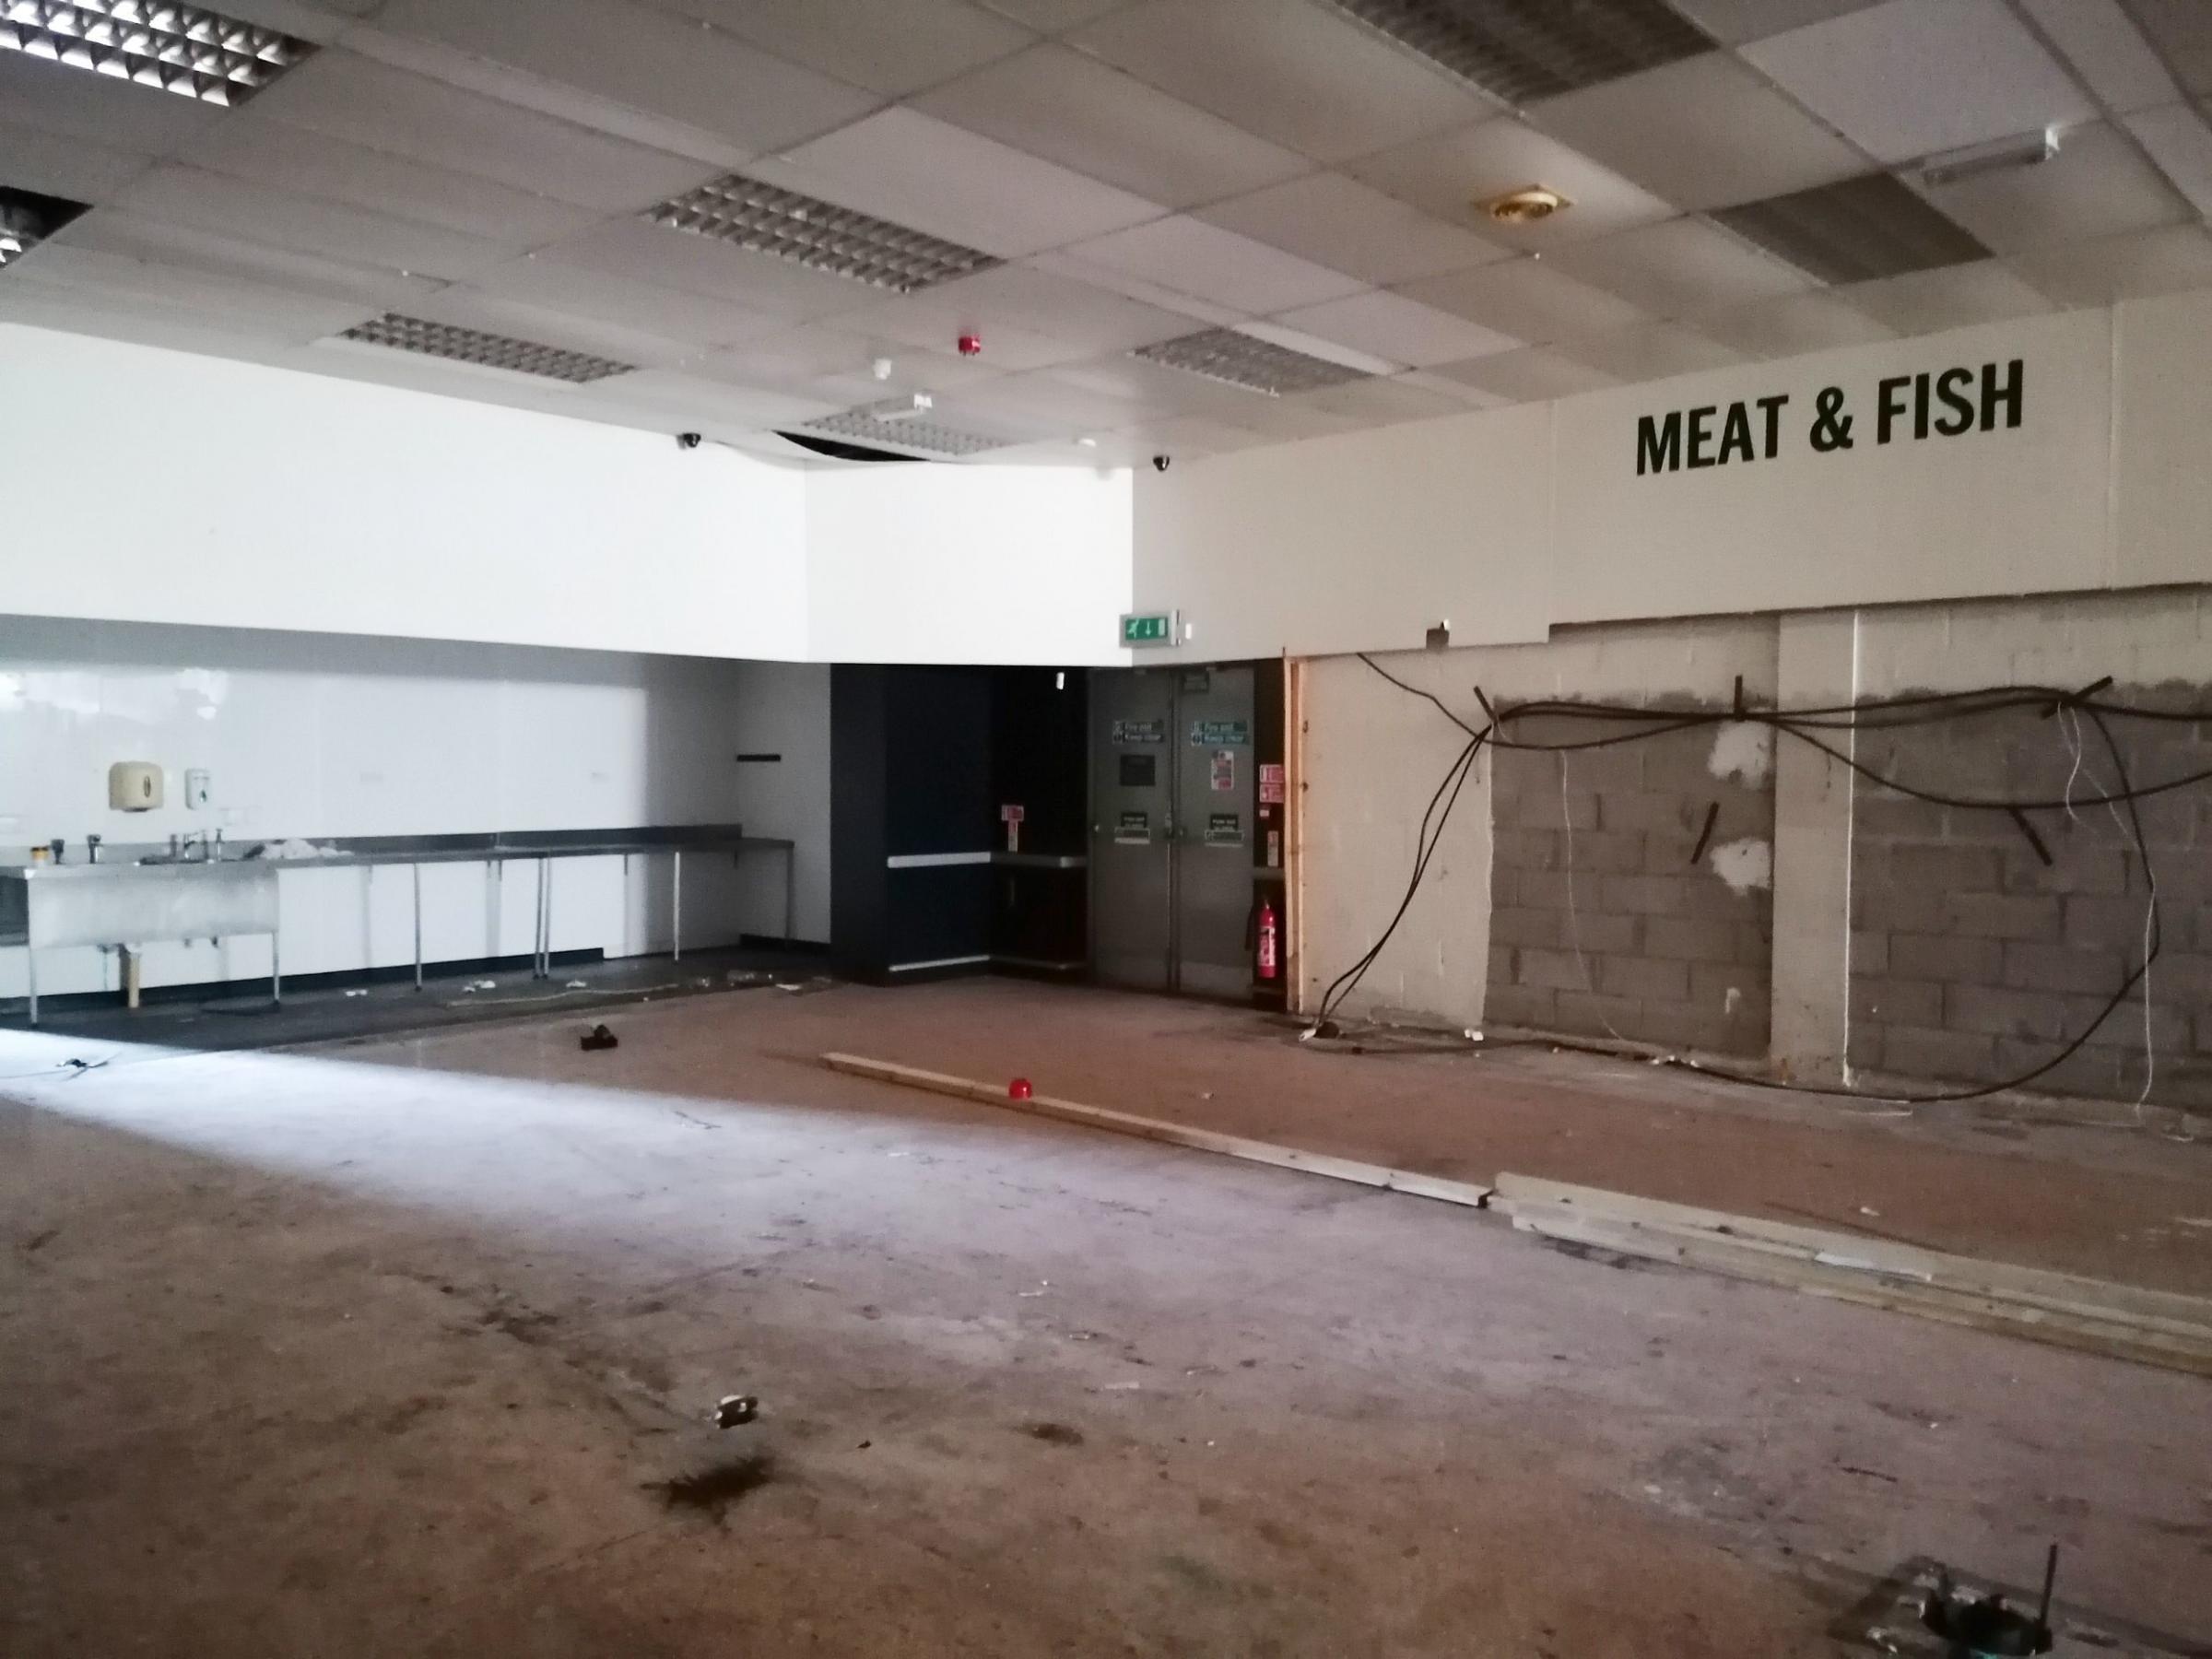 The former cold meat counter and meat and fish area would become a cafe